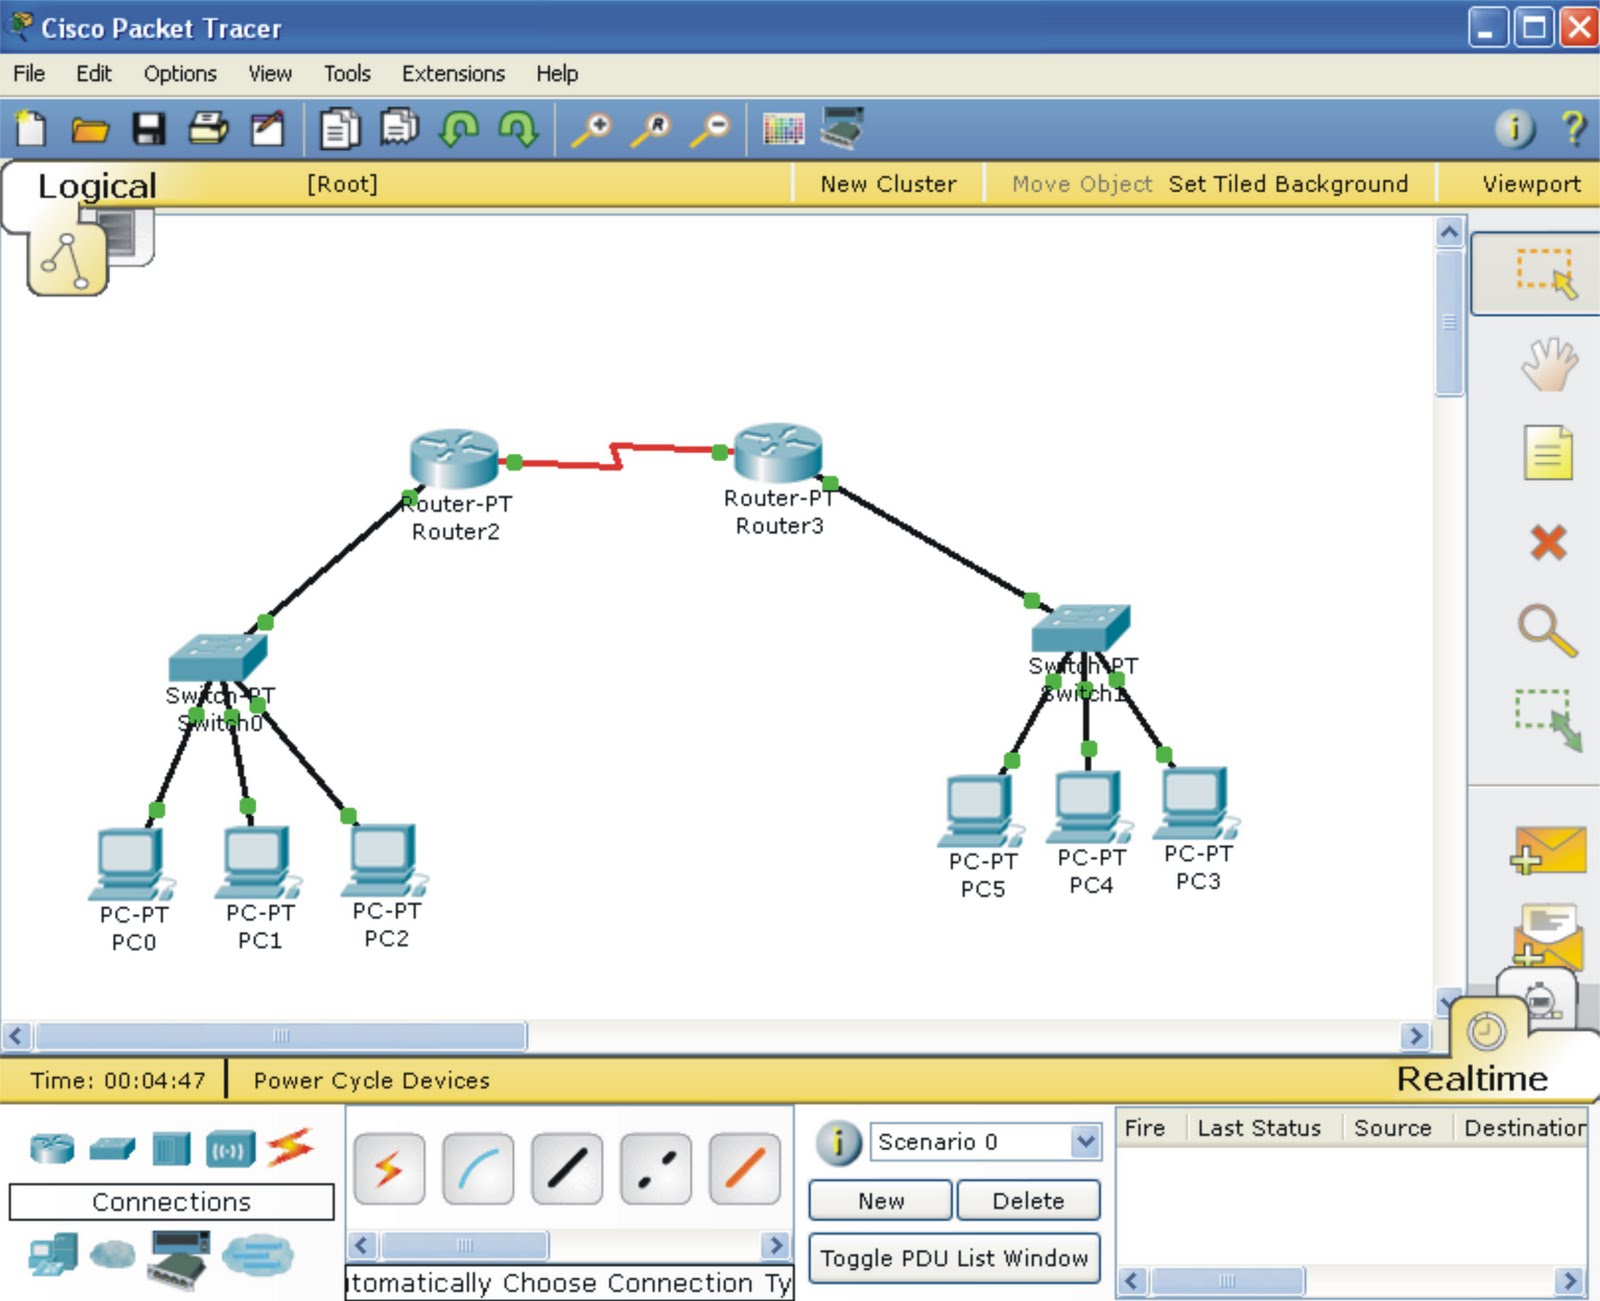 cisco packet tracer 7.2.1 download